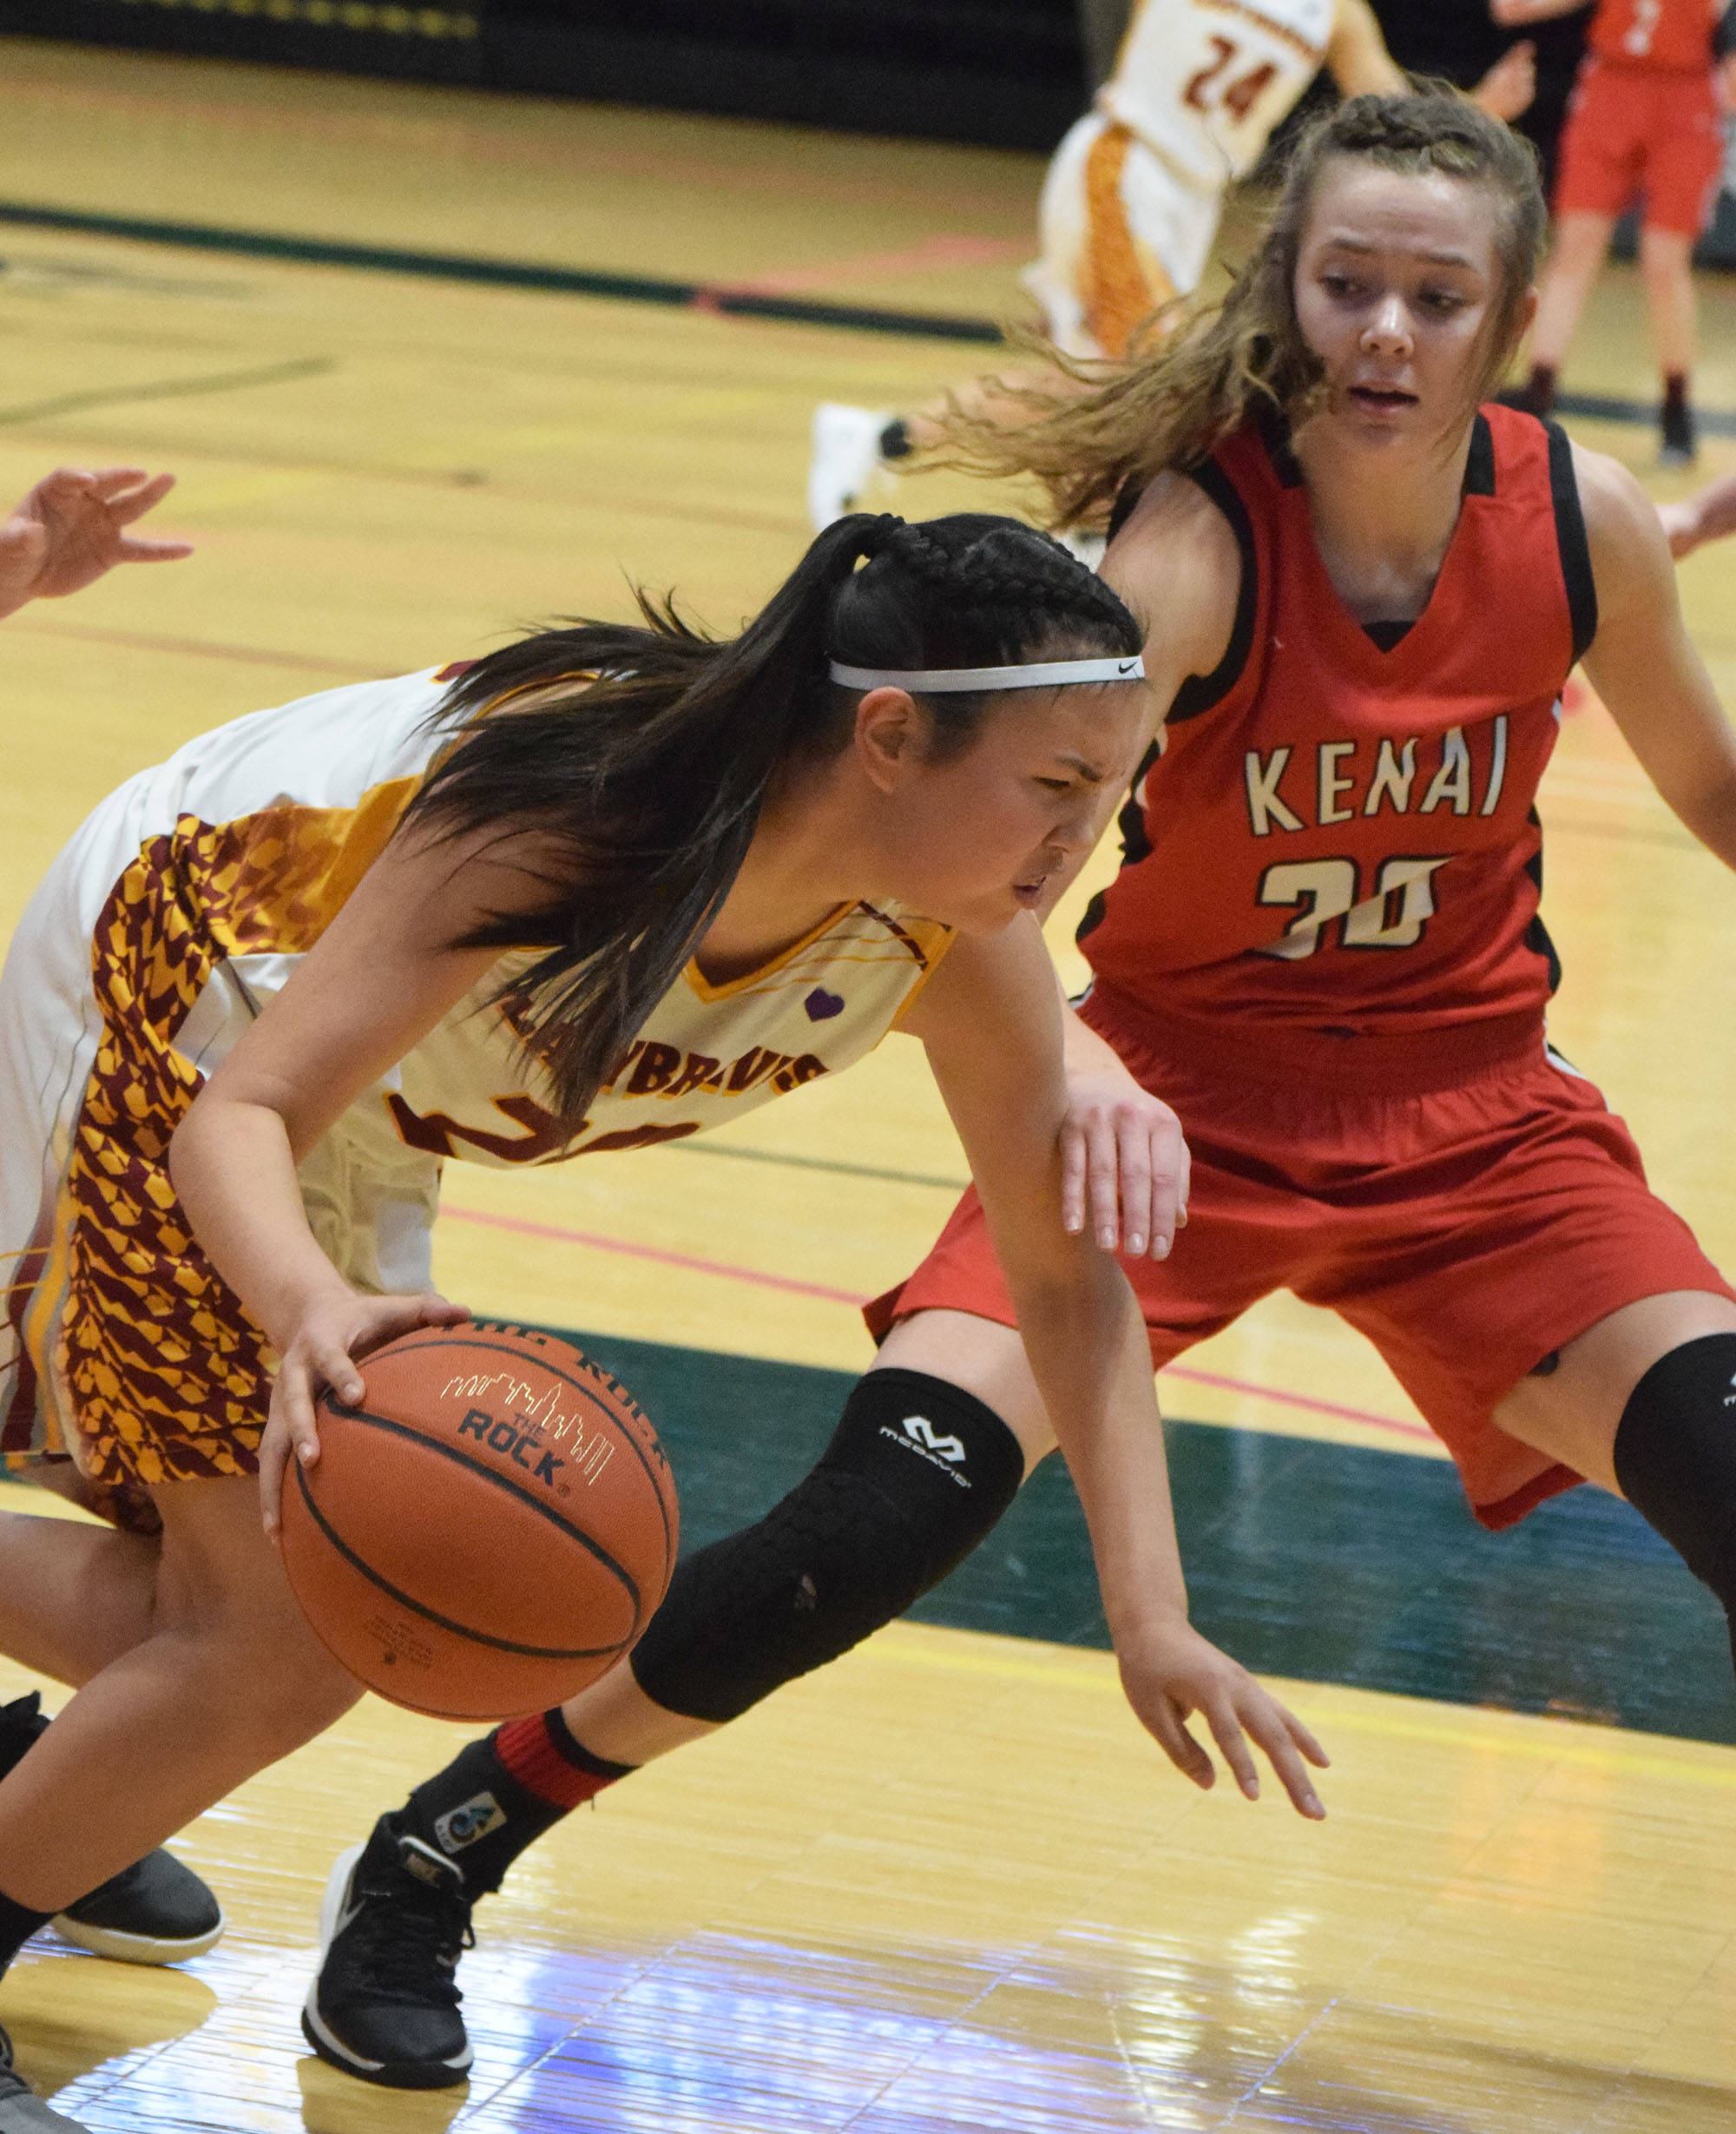 Mt. Edgecumbe’s Autumn Beans (left) tries to evade the defense of Kenai’s Brooke Satathite, Thursday, Mar. 21, 2019, at the Class 3A state championship tournament at the Alaska Airlines Center in Anchorage. (Photo by Joey Klecka/Peninsula Clarion)